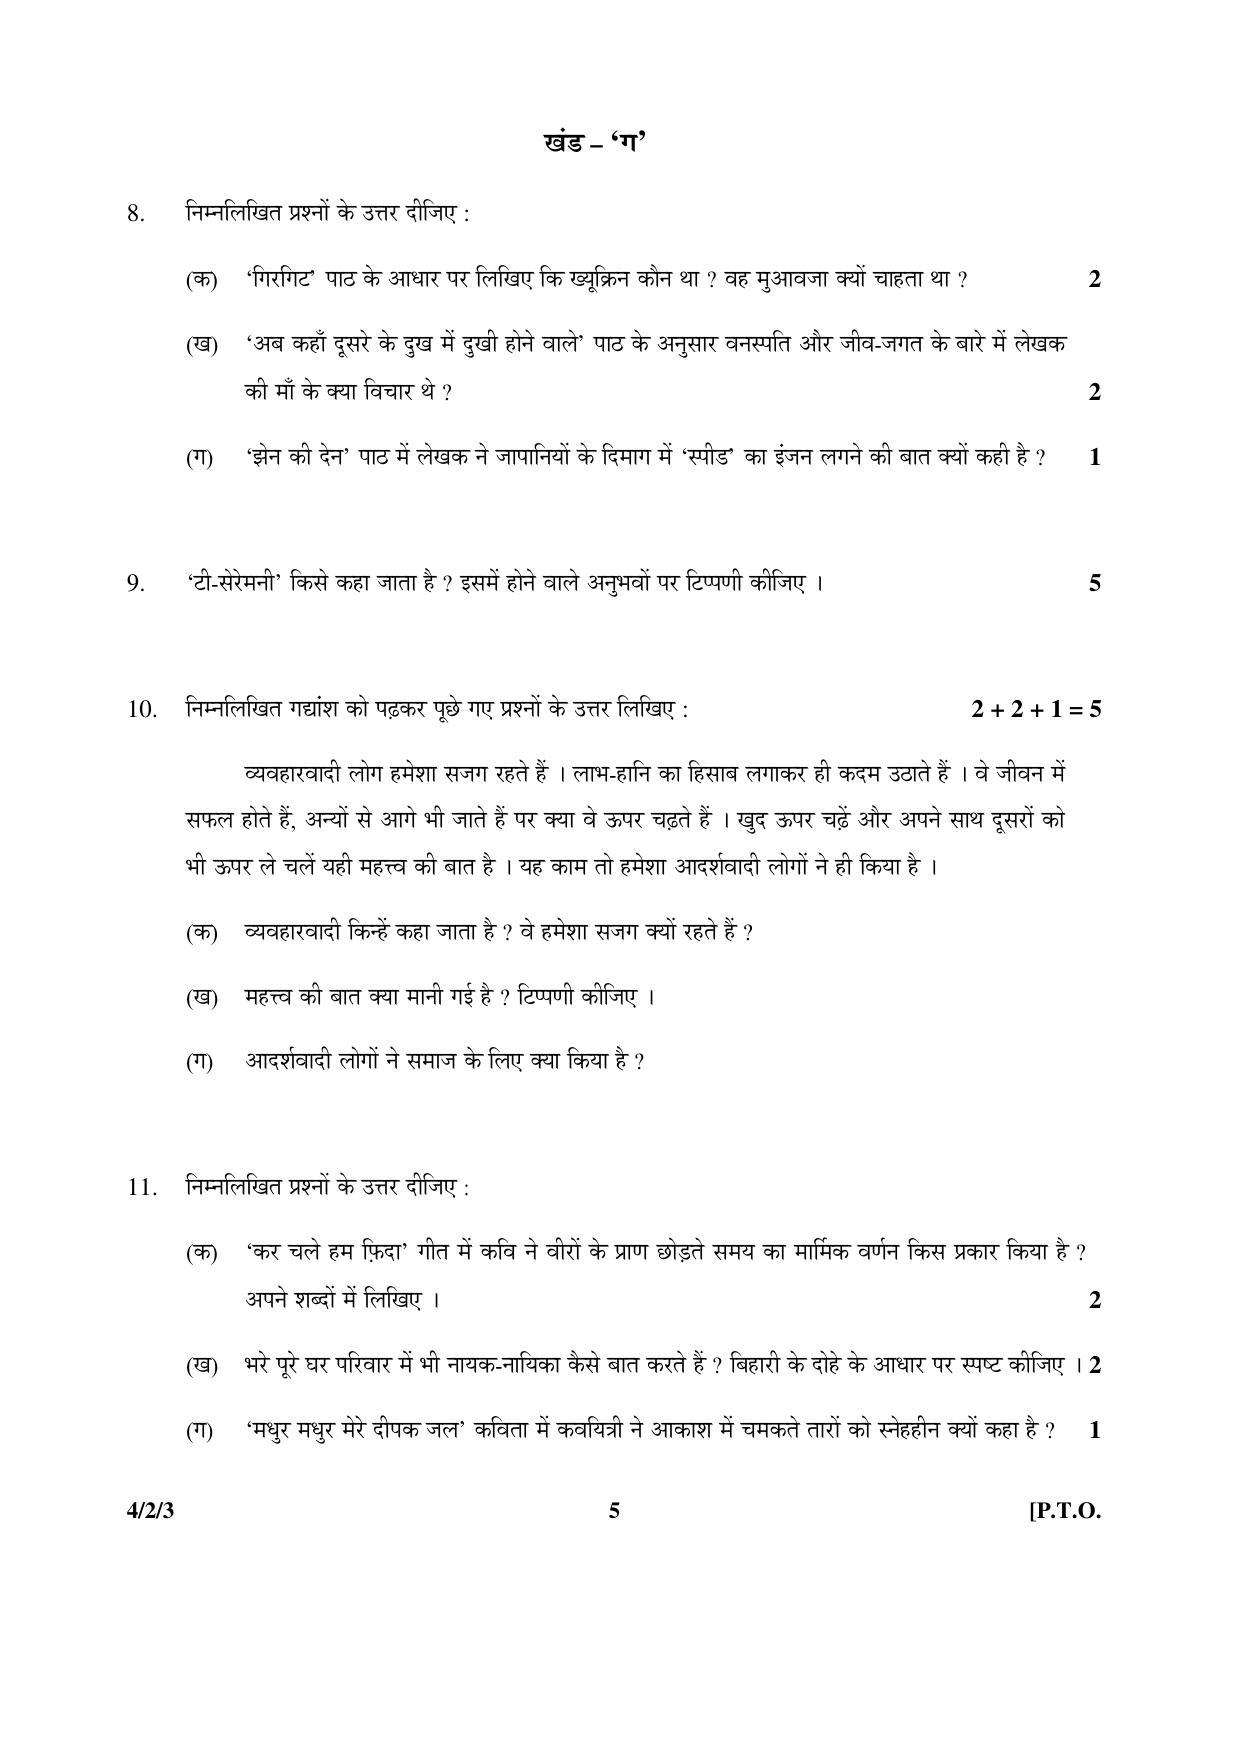 CBSE Class 10 4-2-3  Hindi - B 2016 Question Paper - Page 5